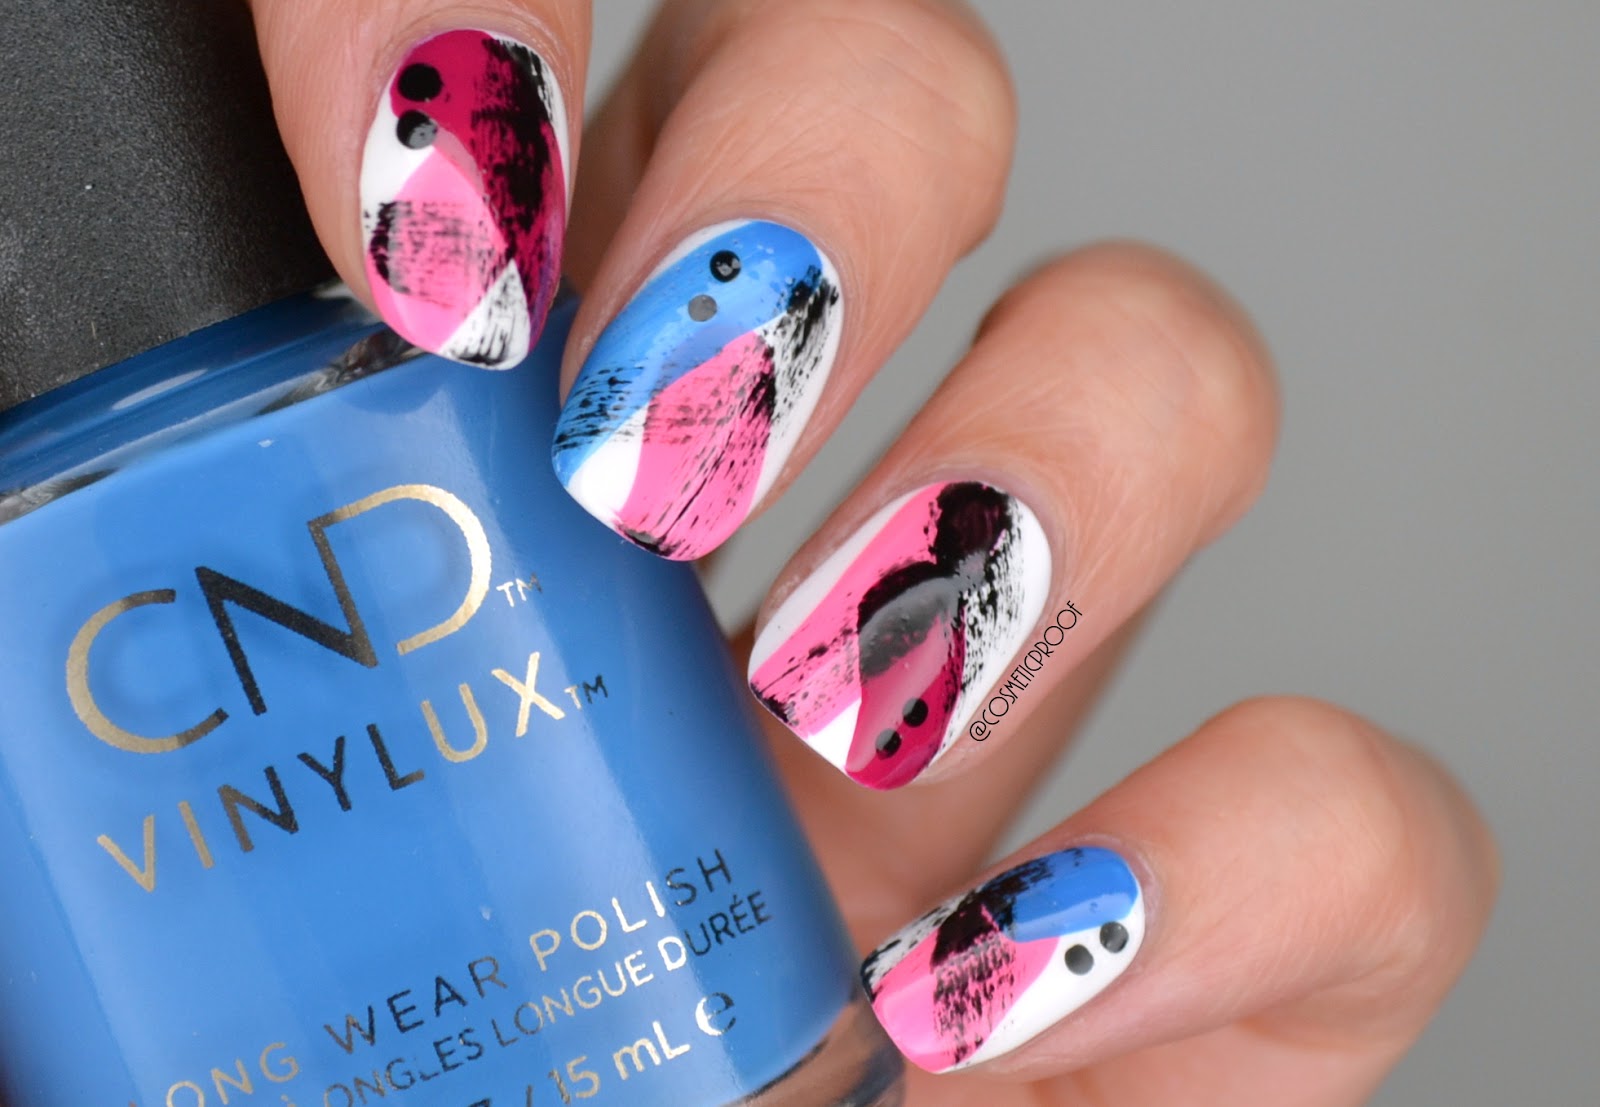 4. "Colorful Abstract Nail Art Tutorial" - wide 9